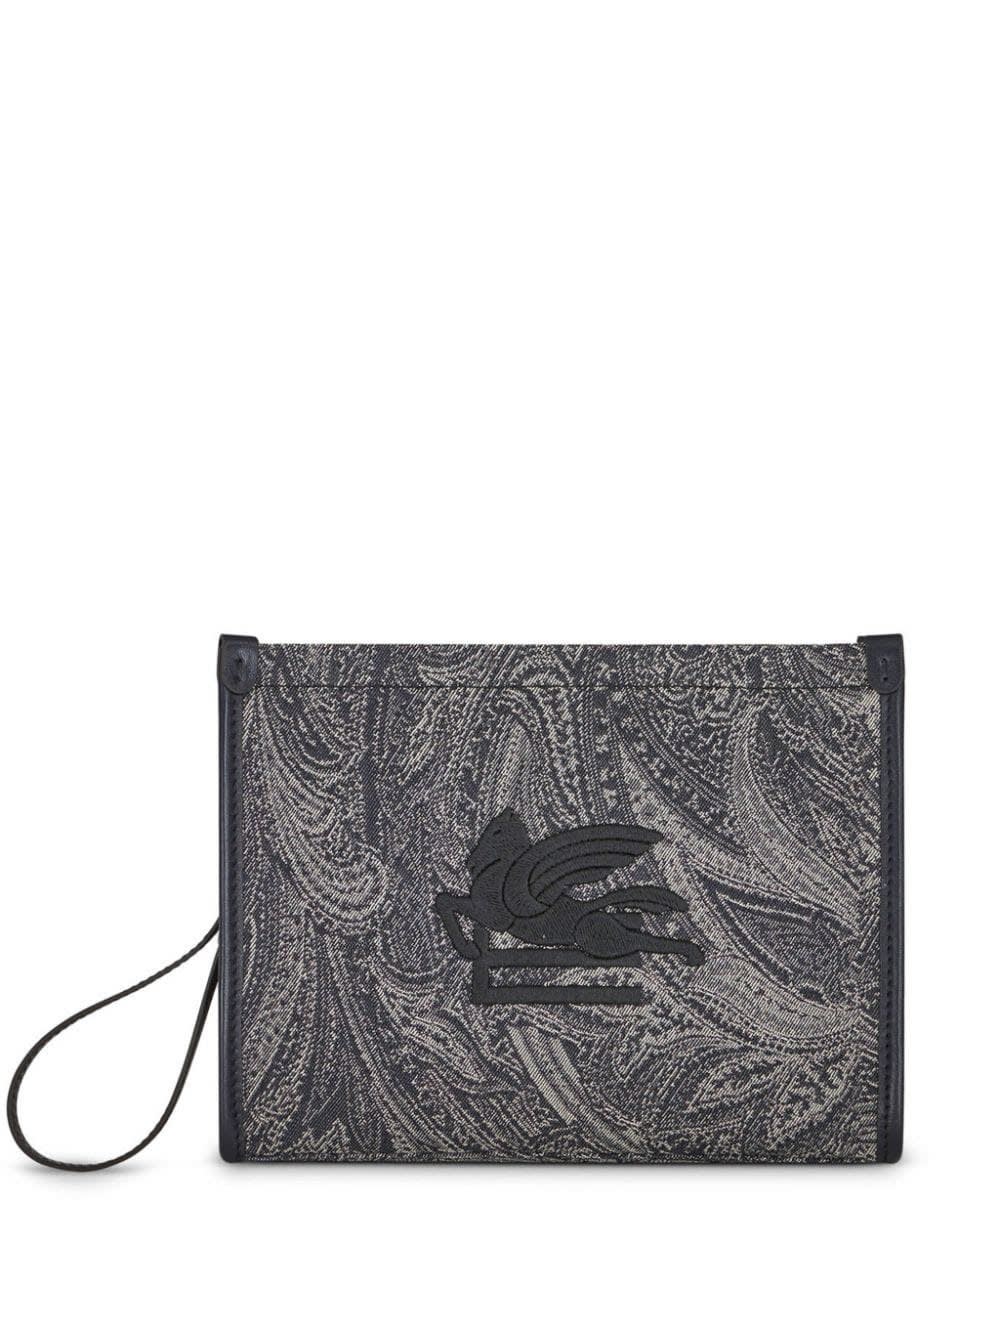 Etro Navy Blue Pouch With Paisley Jacquard Motif